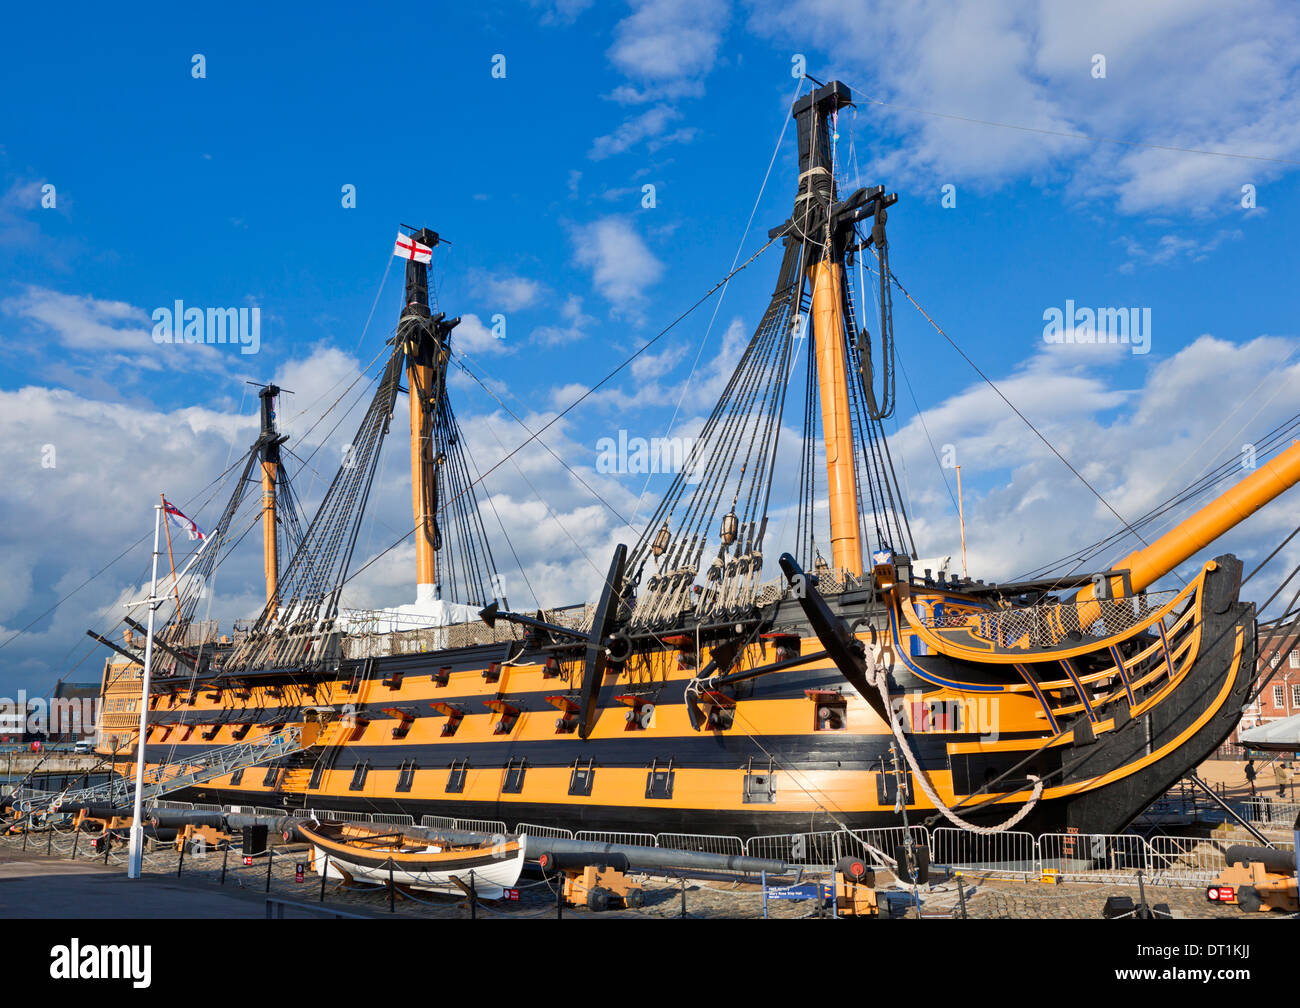 HMS Victory in the Portsmouth Historic Dockyard, Portsmouth, Hampshire, England, United Kingdom, Europe Stock Photo